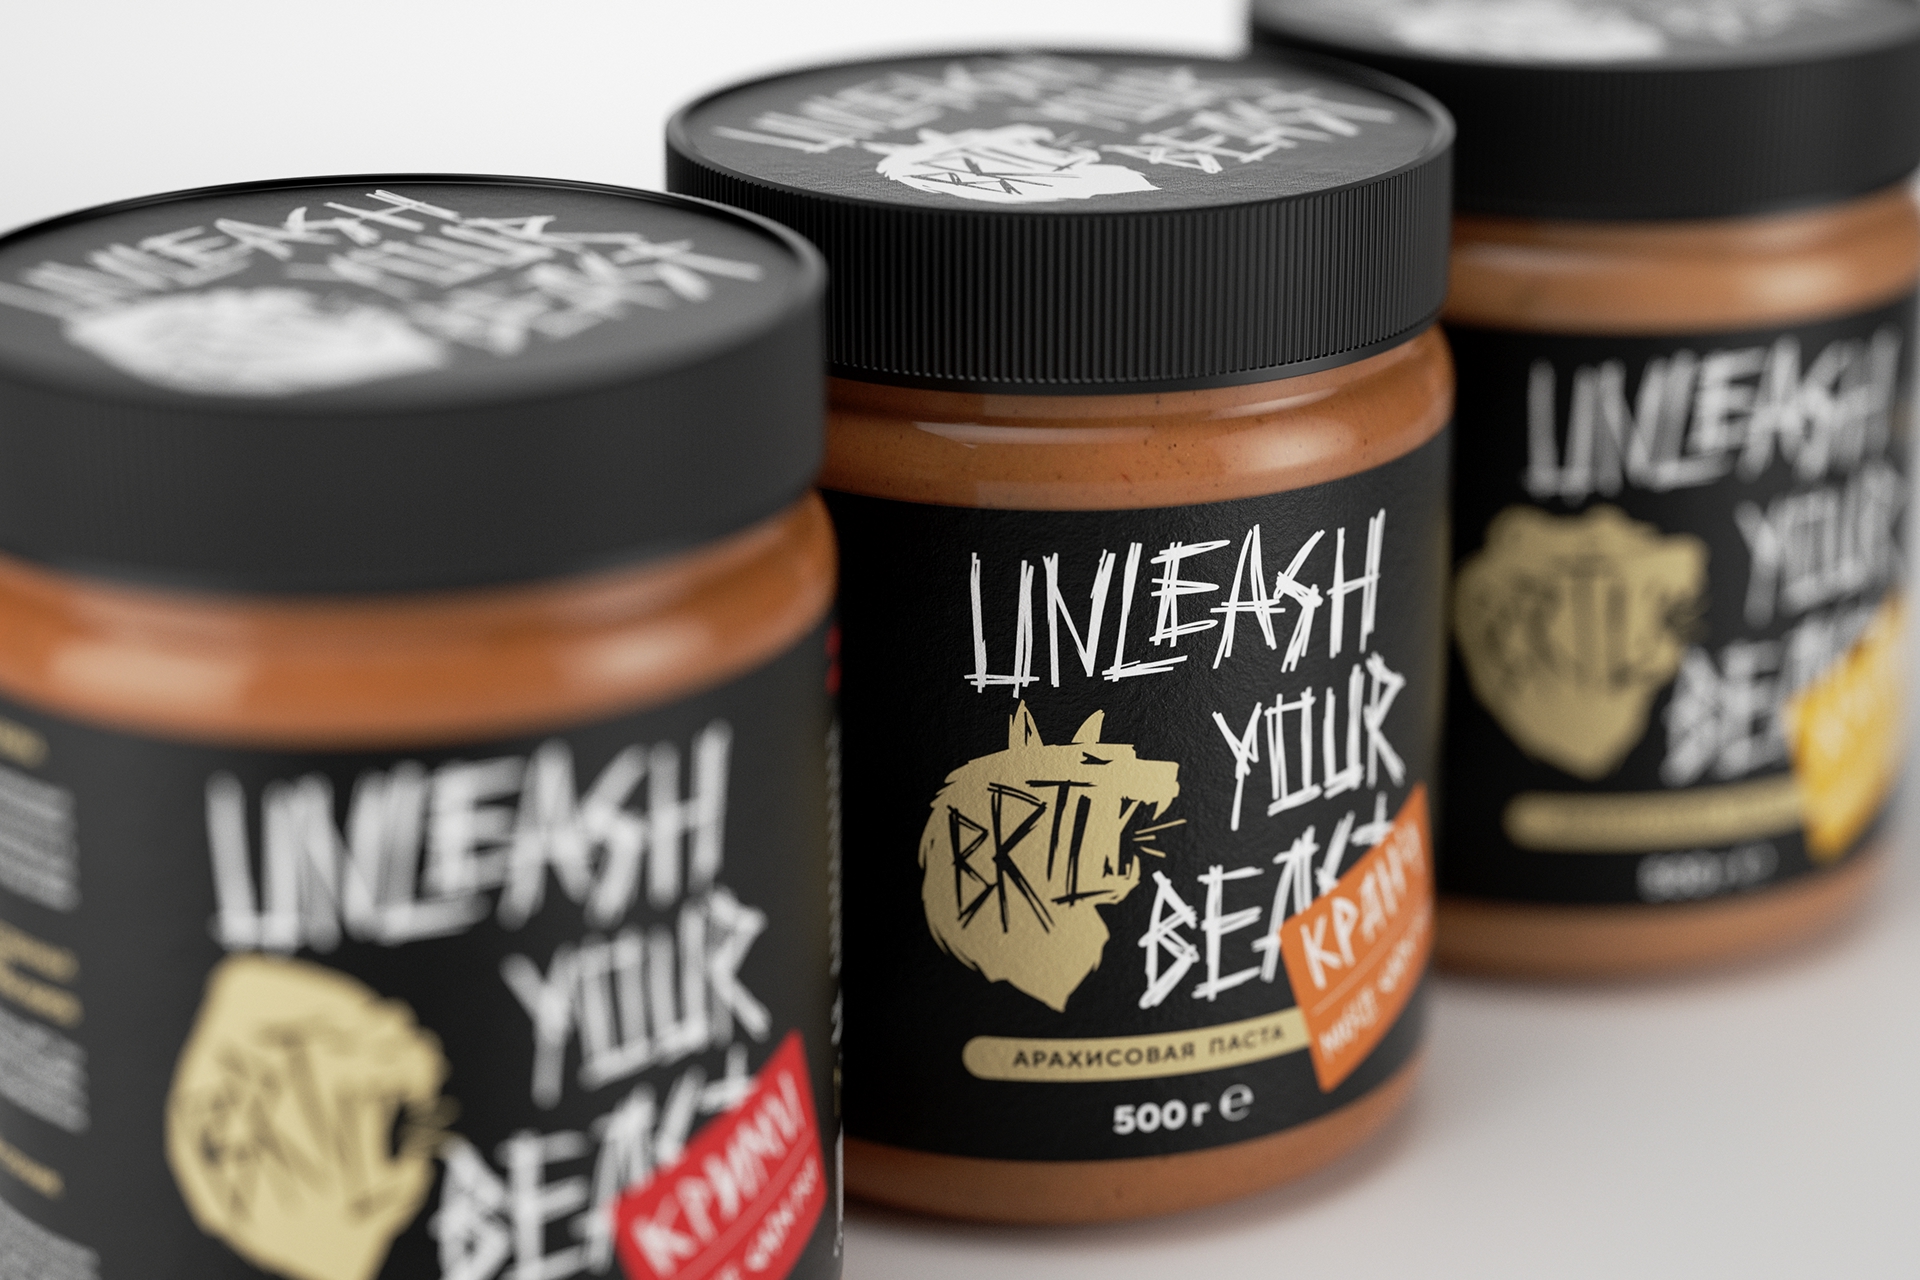 A New Series of Peanut Butter Packaging to Help its Customers “To Unleash the Beast”